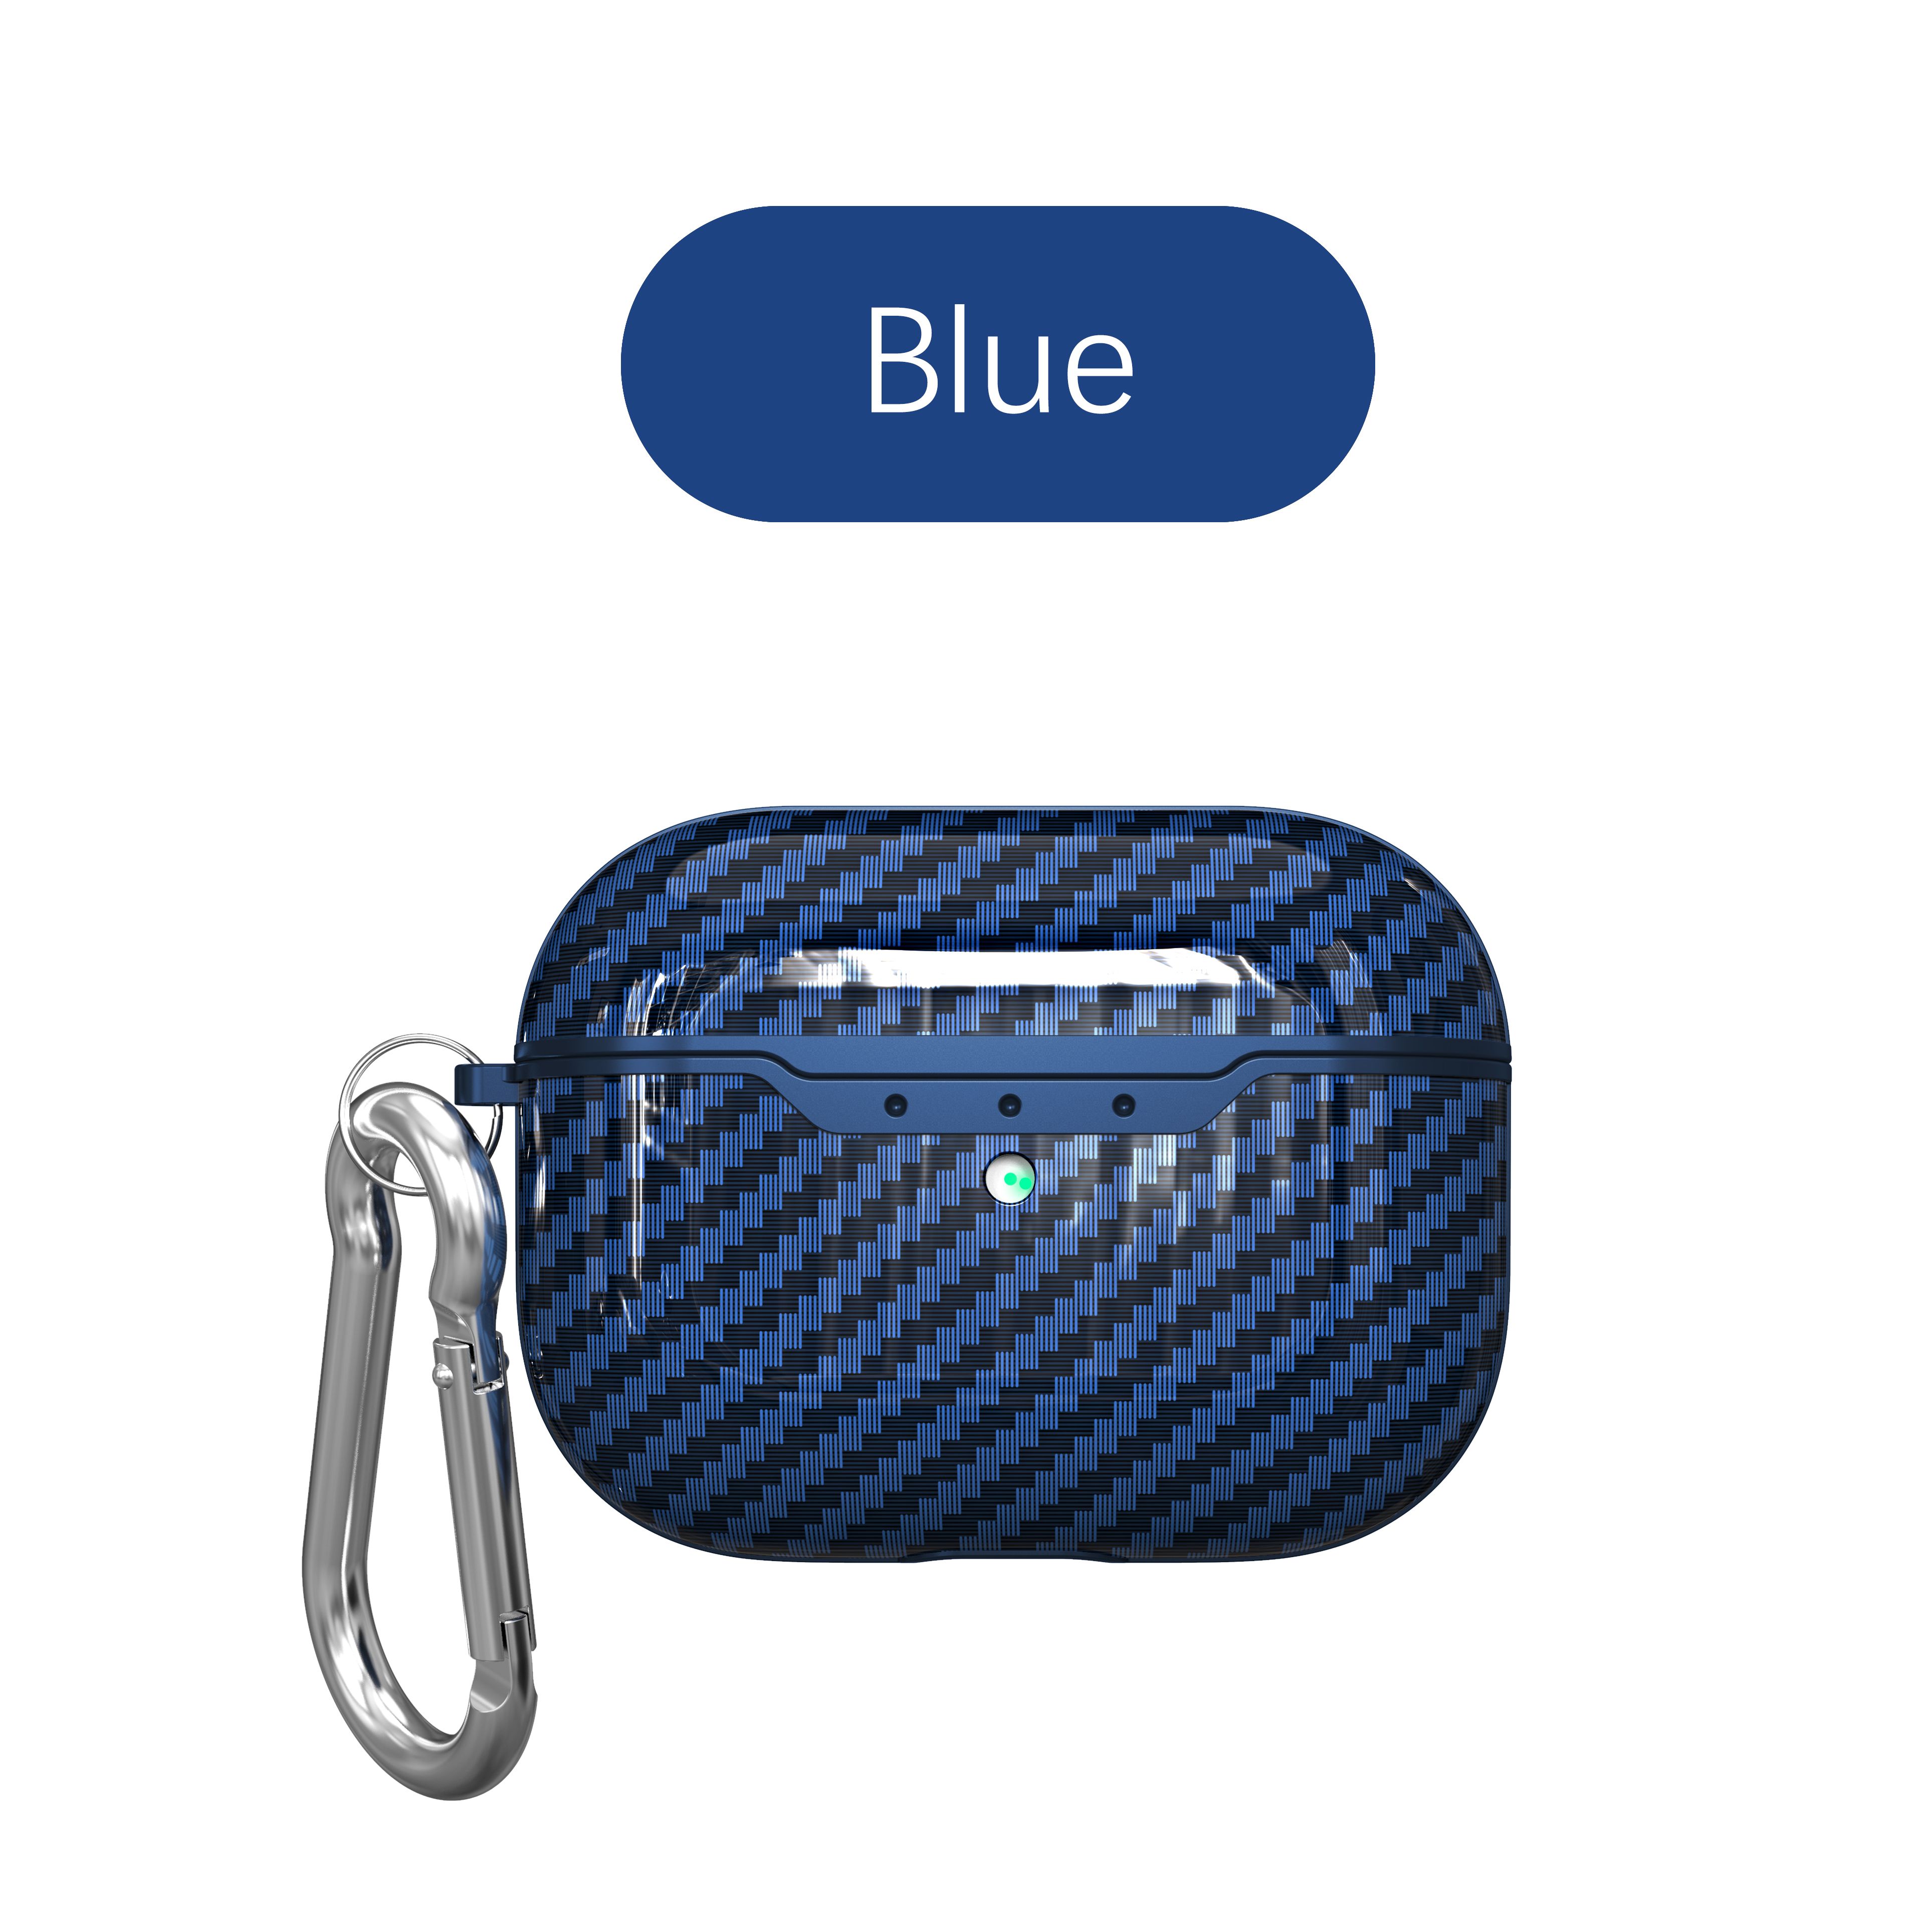 Blue(for airpods pro 2019)